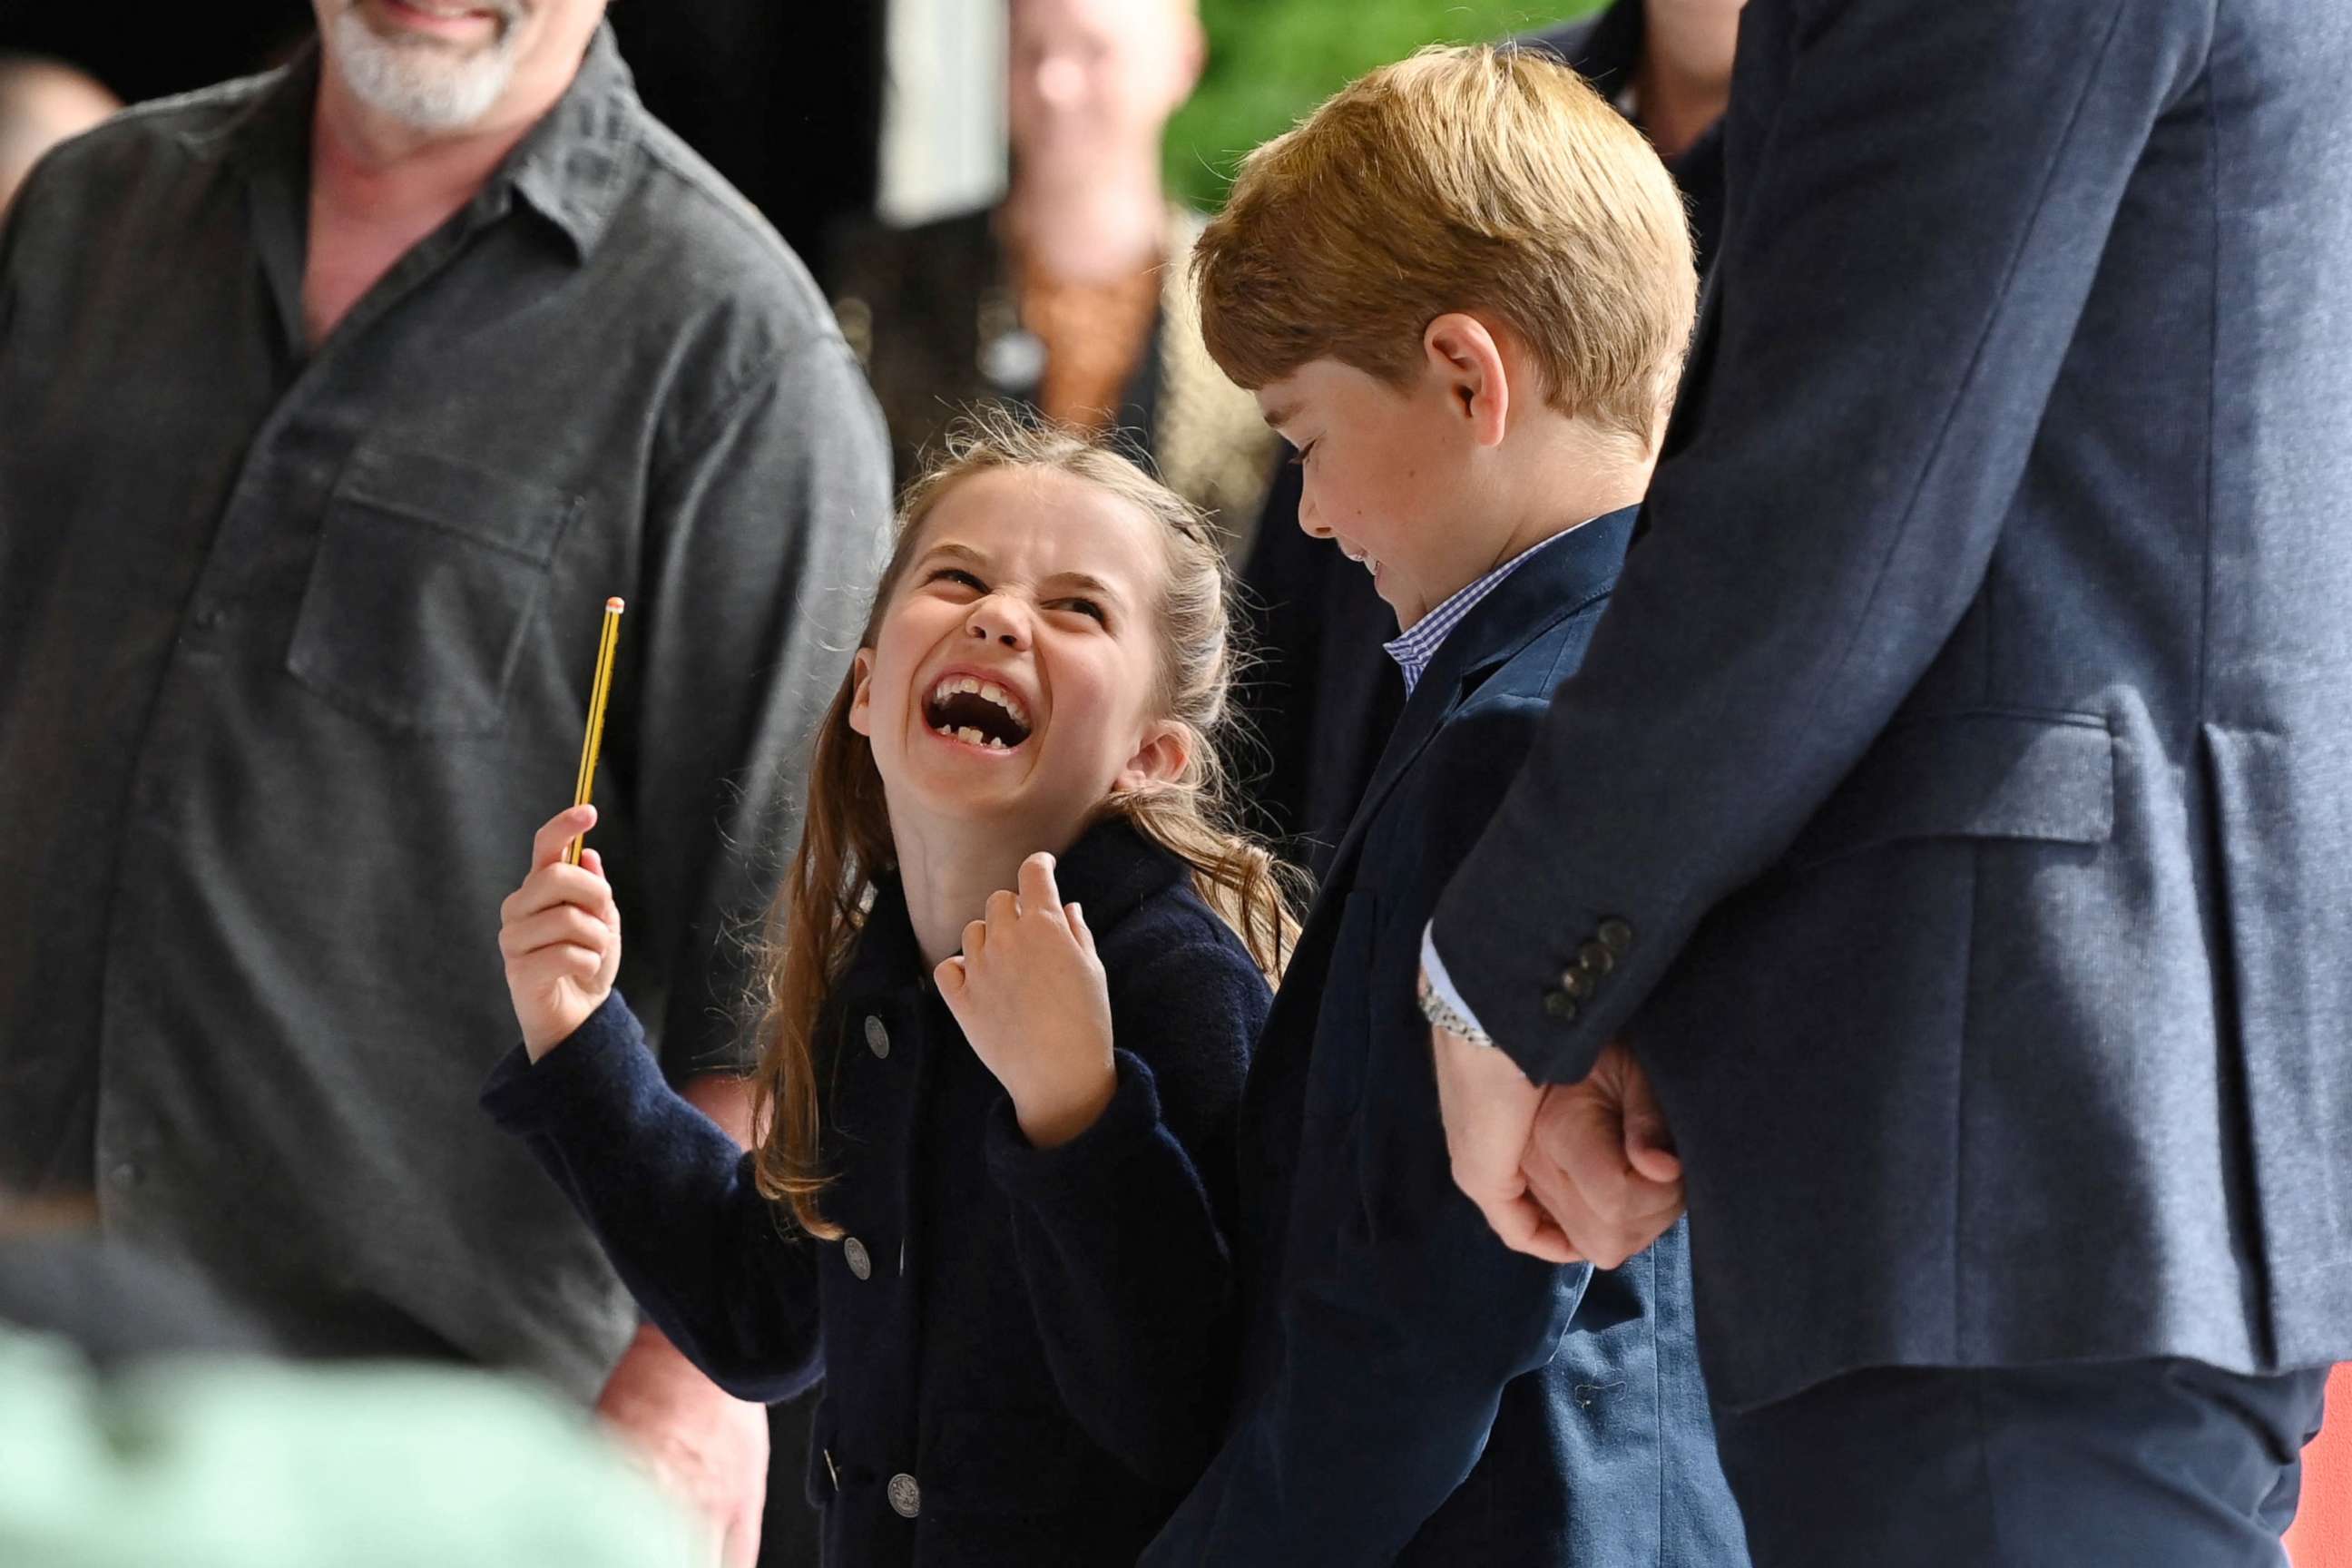 PHOTO: Princess Charlotte laughs as she conducts a band next to her brother Prince George during their visit to Cardiff Castle as part of the royal family's tour for Queen Elizabeth's Platinum Jubilee celebrations in Cardiff, Wales, Britain, June 4, 2022.